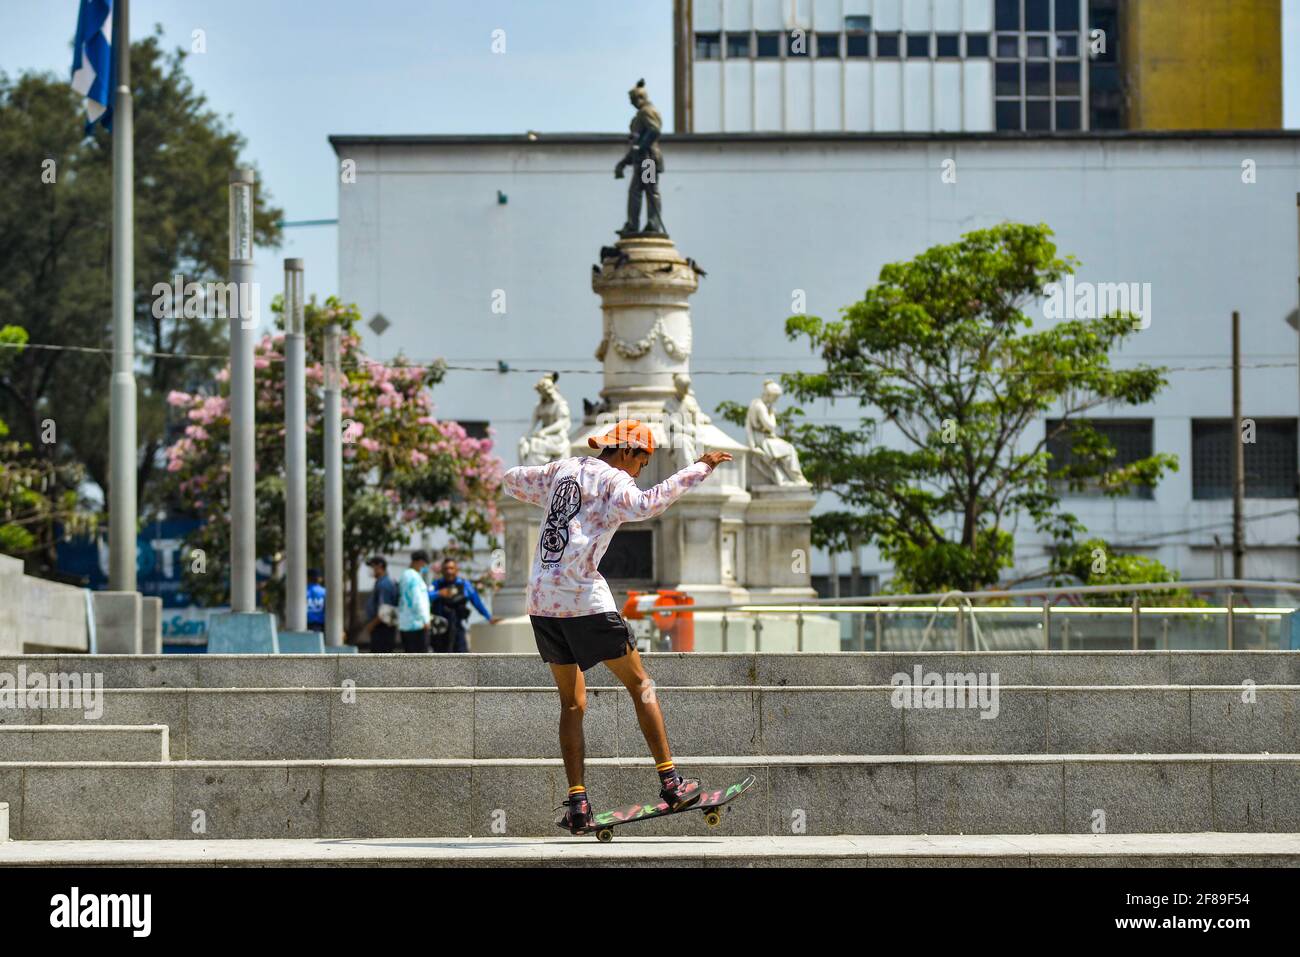 San Salvador, El Salvador. 12th Apr, 2021. A man skates in front of the Francisco Morazan Plaza.El Salvador reports more than 66 thousand confirmed COVID-19 cases as well as 2,054 deaths. Credit: Camilo Freedman/SOPA Images/ZUMA Wire/Alamy Live News Stock Photo